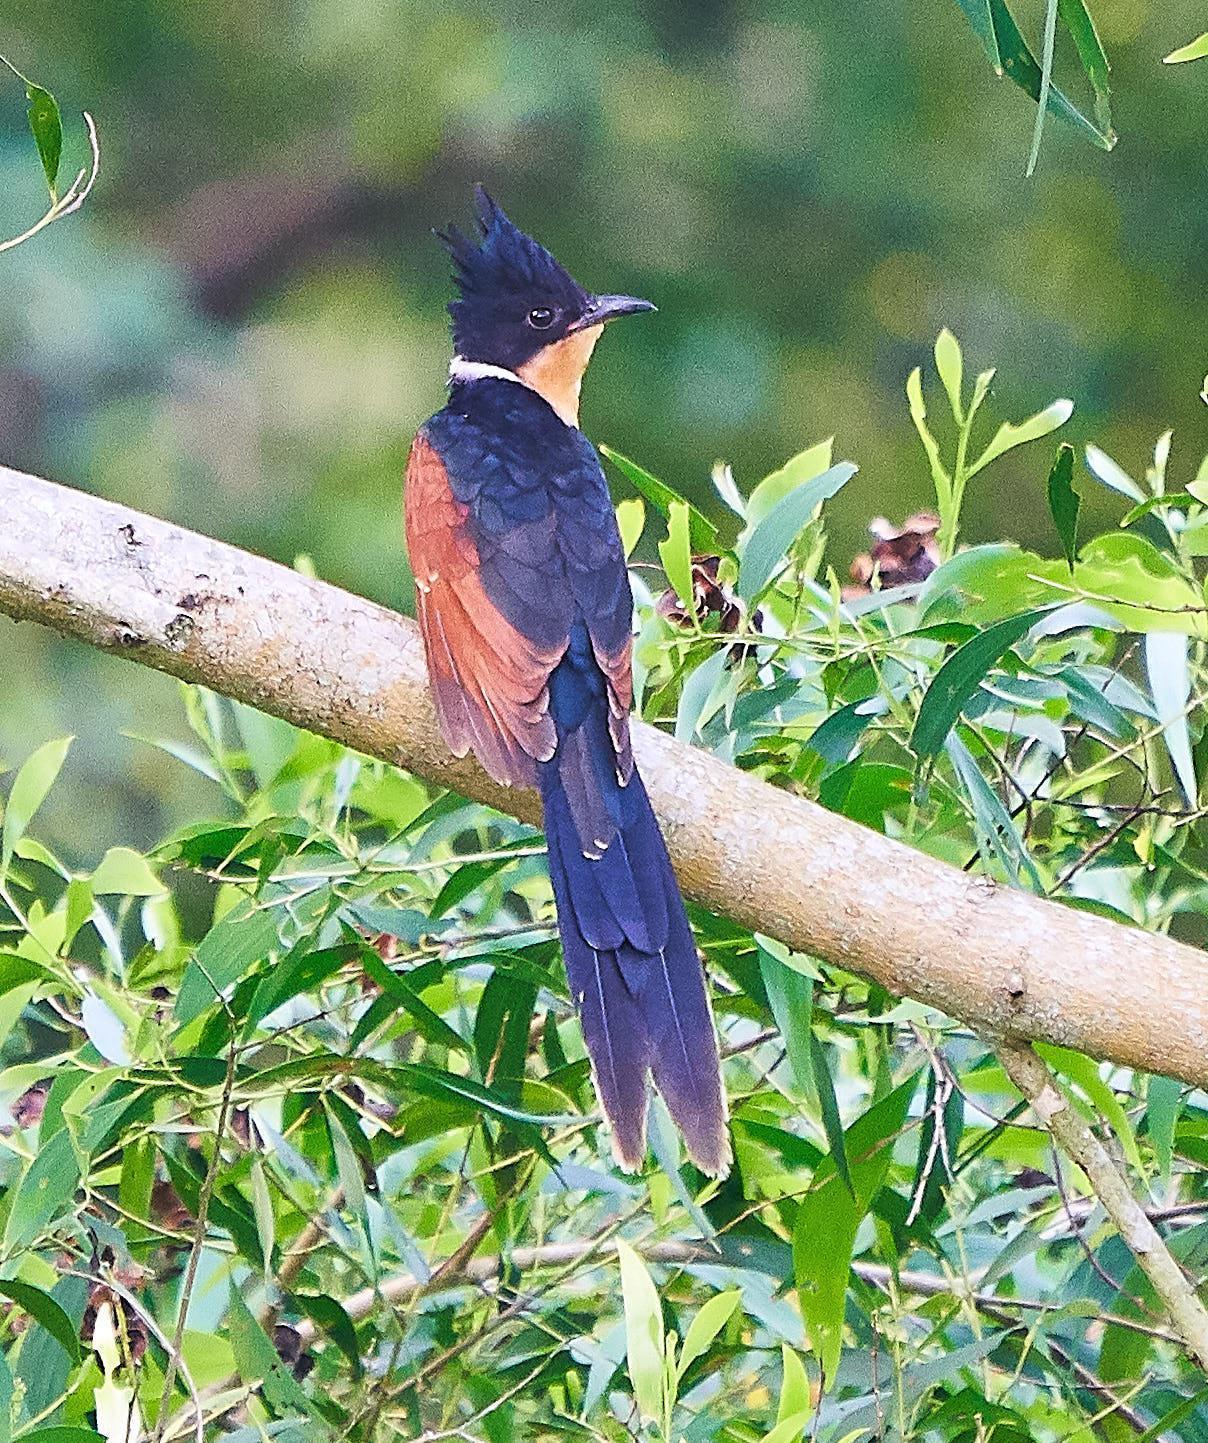 Chestnut-winged Cuckoo Photo by Steven Cheong